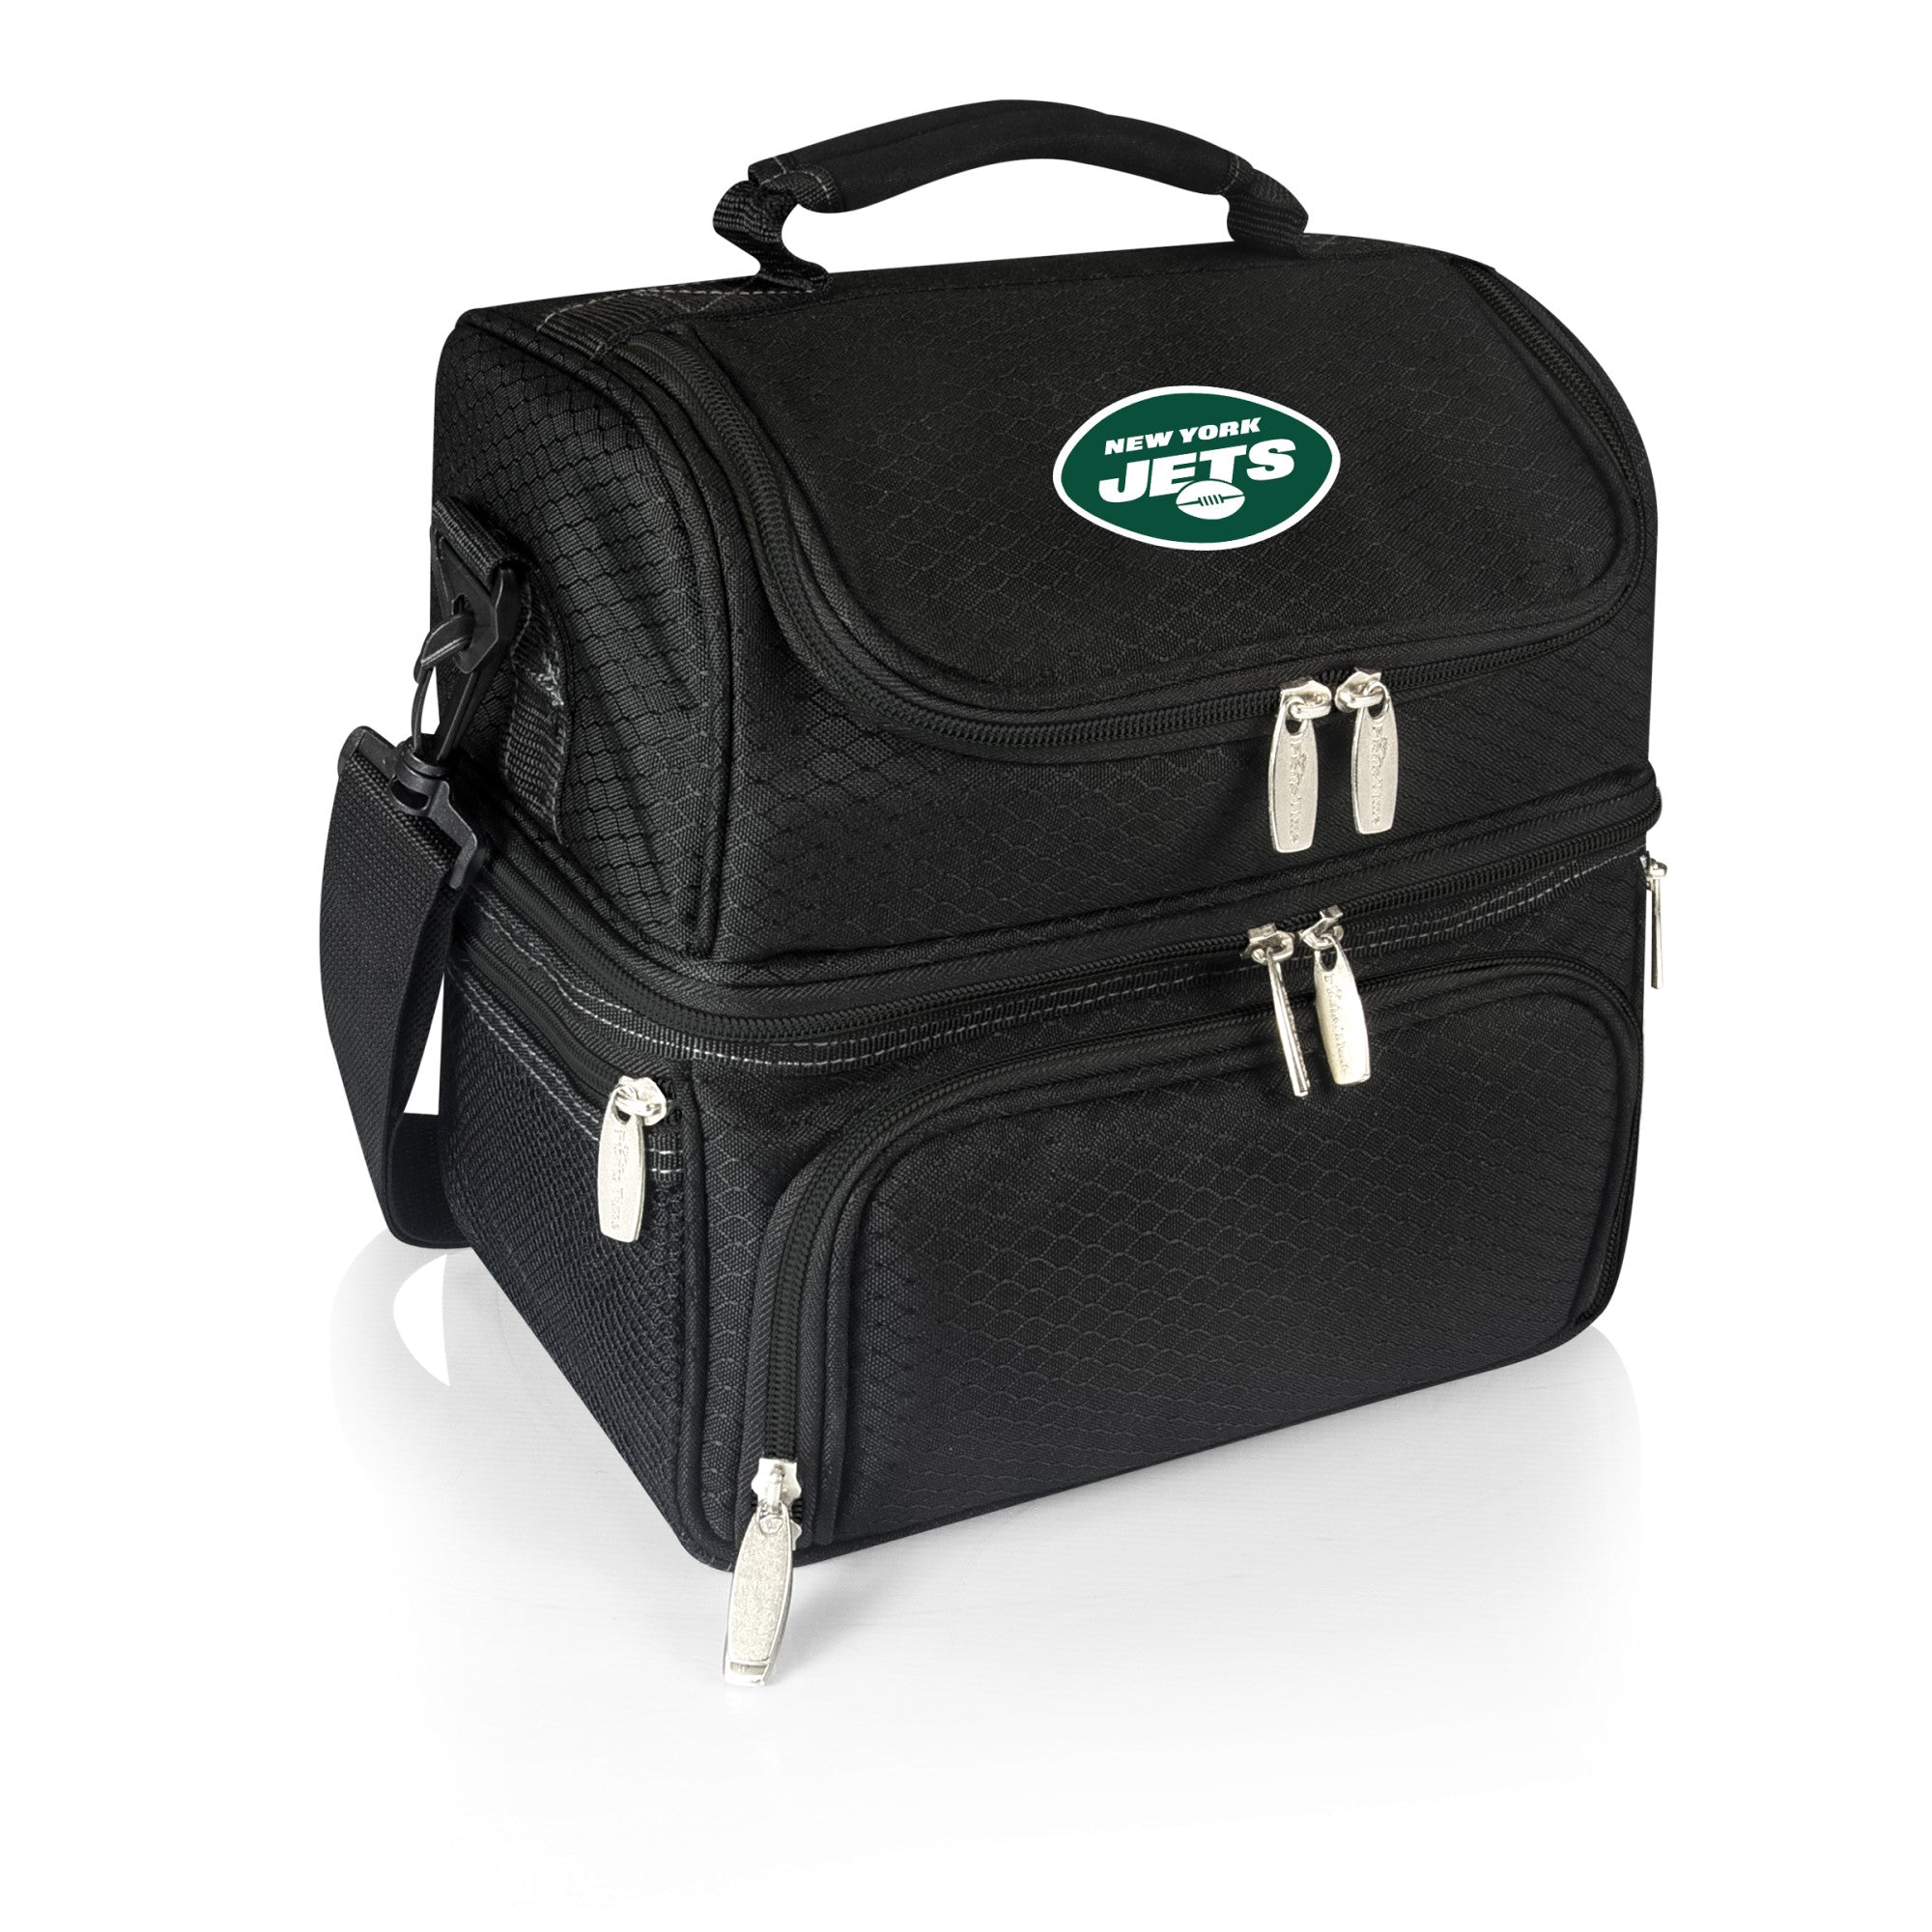 New York Jets - Pranzo Lunch Bag Cooler with Utensils